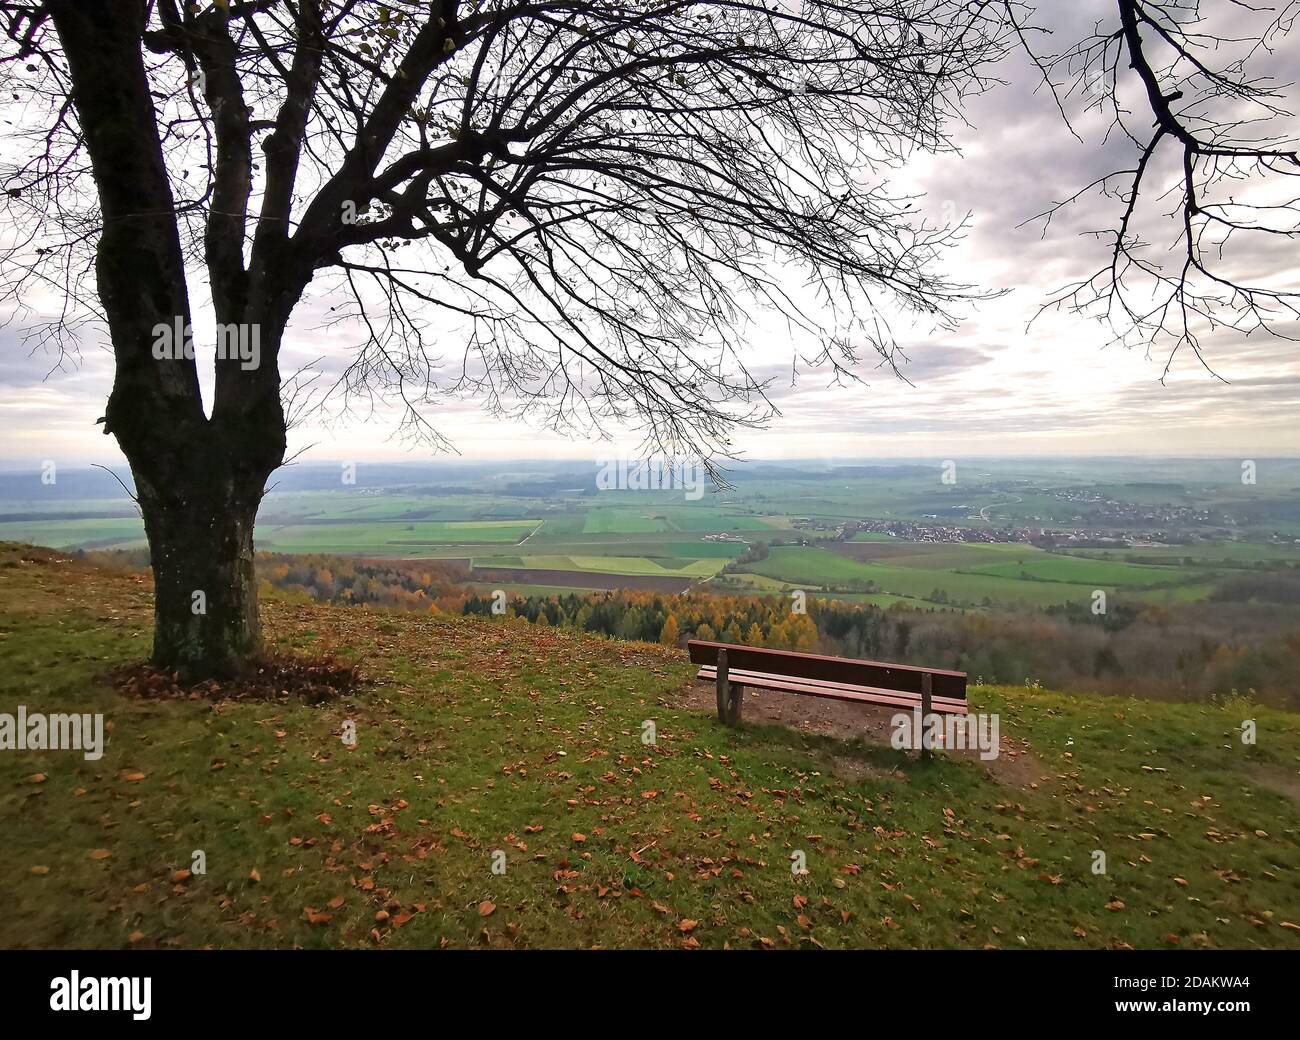 view showing a bench and a bare tree on a mountain and a panoramic view to an autumn landscape Stock Photo